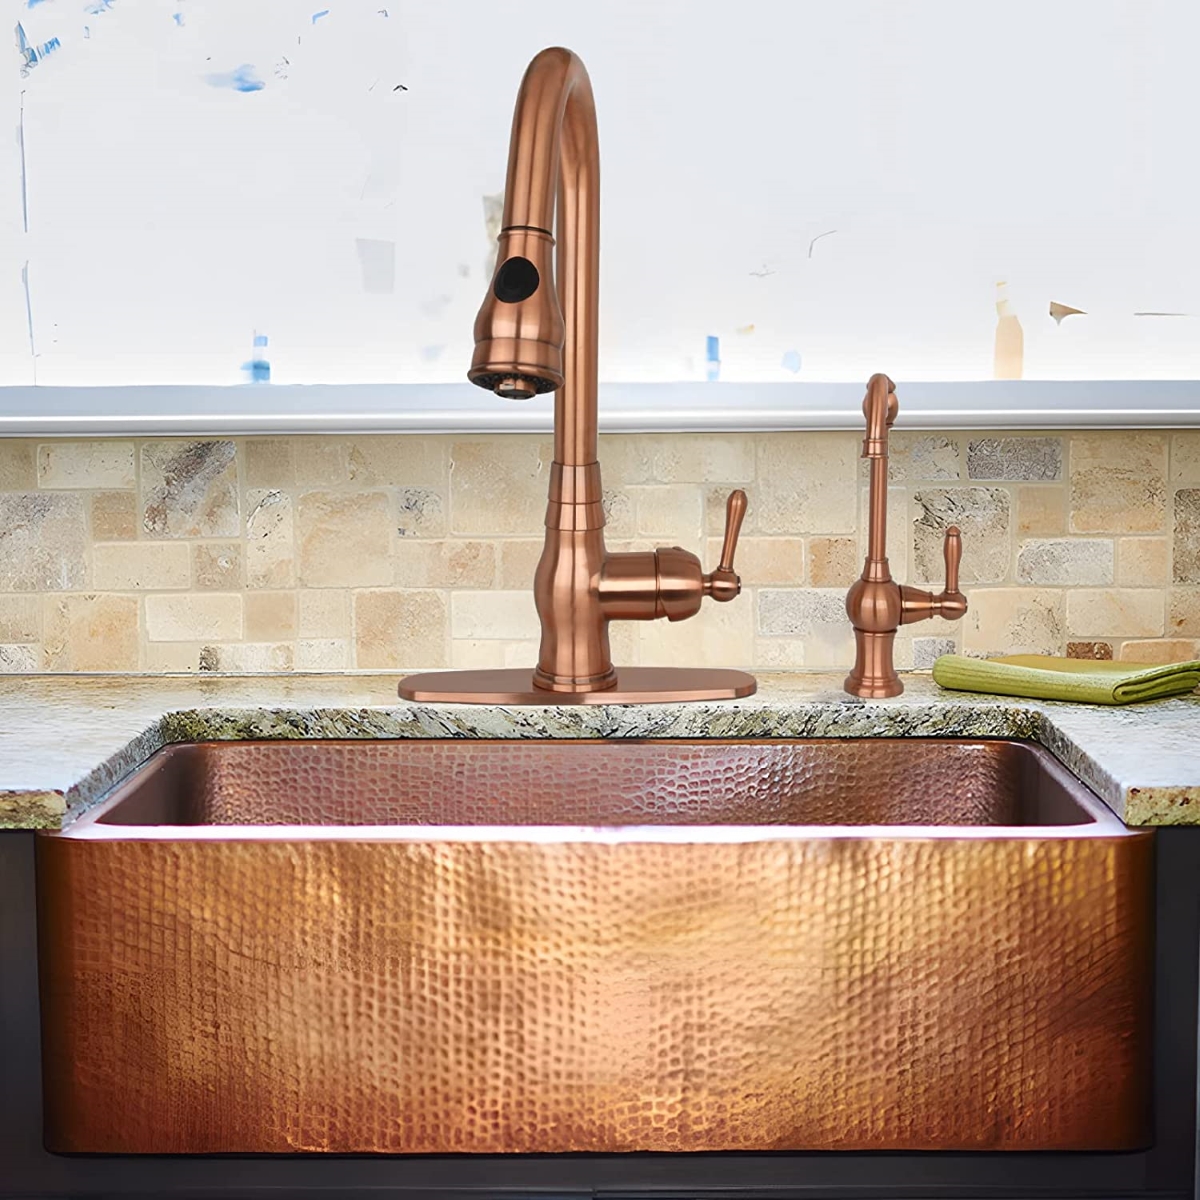 Why You Need More Copper In Your Home